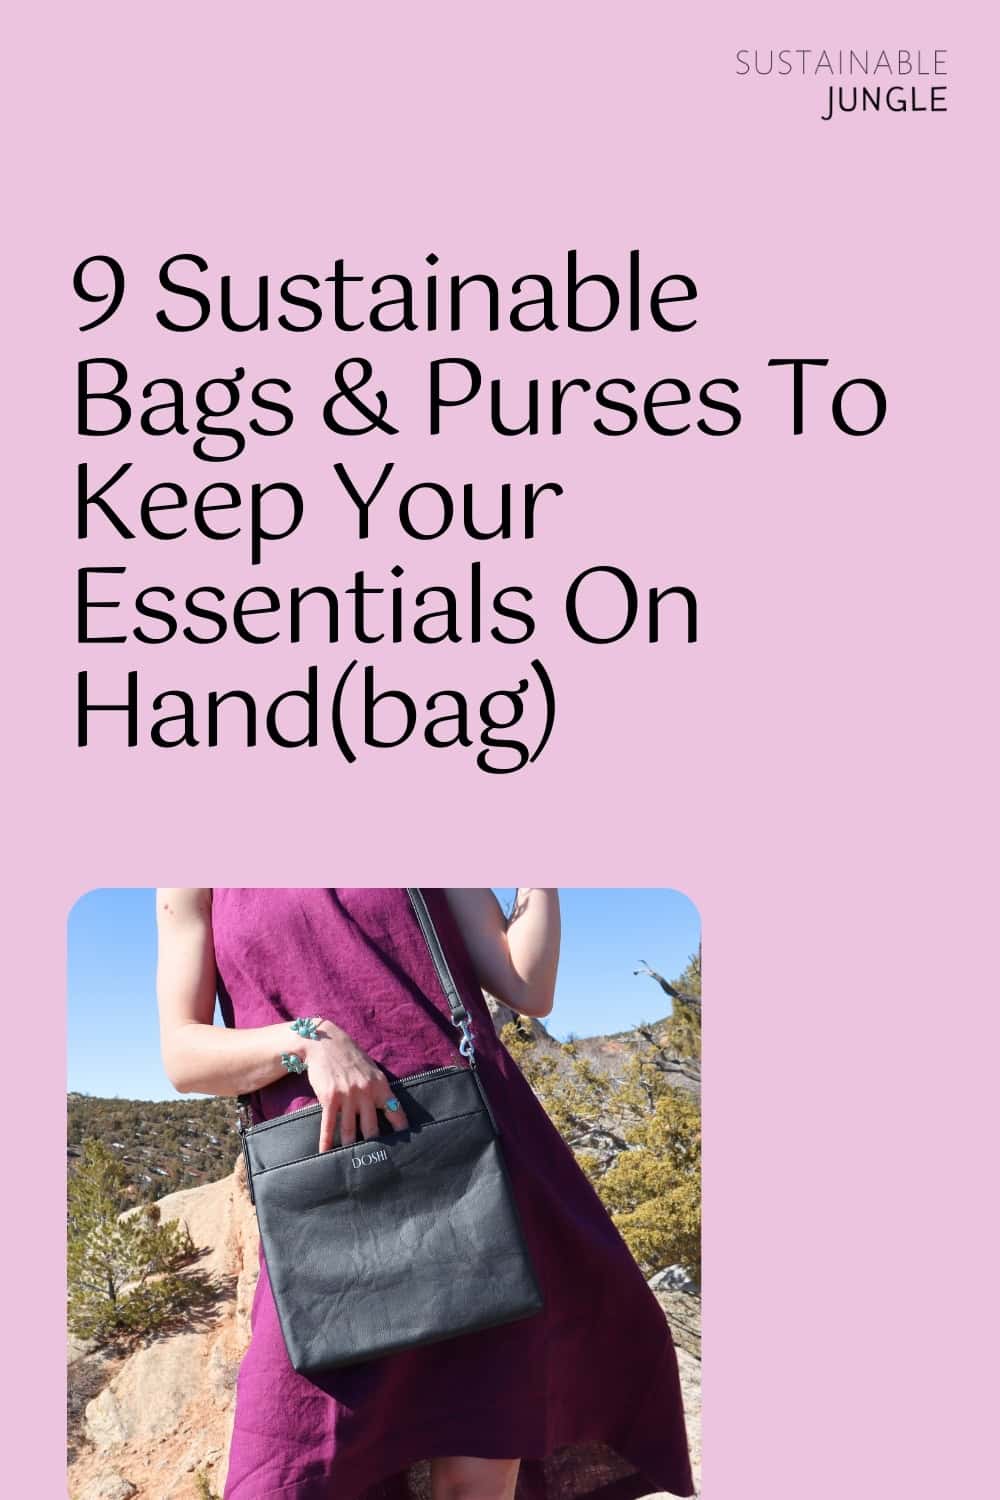 9 Sustainable Bags & Purses To Keep Your Essentials On Hand(bag) Image by Sustainable Jungle #sustainablebags #sustainablepurses #sustainablehandbags #ecofriendlybags #ecofriendlypurses #ecofriendlyhandbags #sustainablejungle